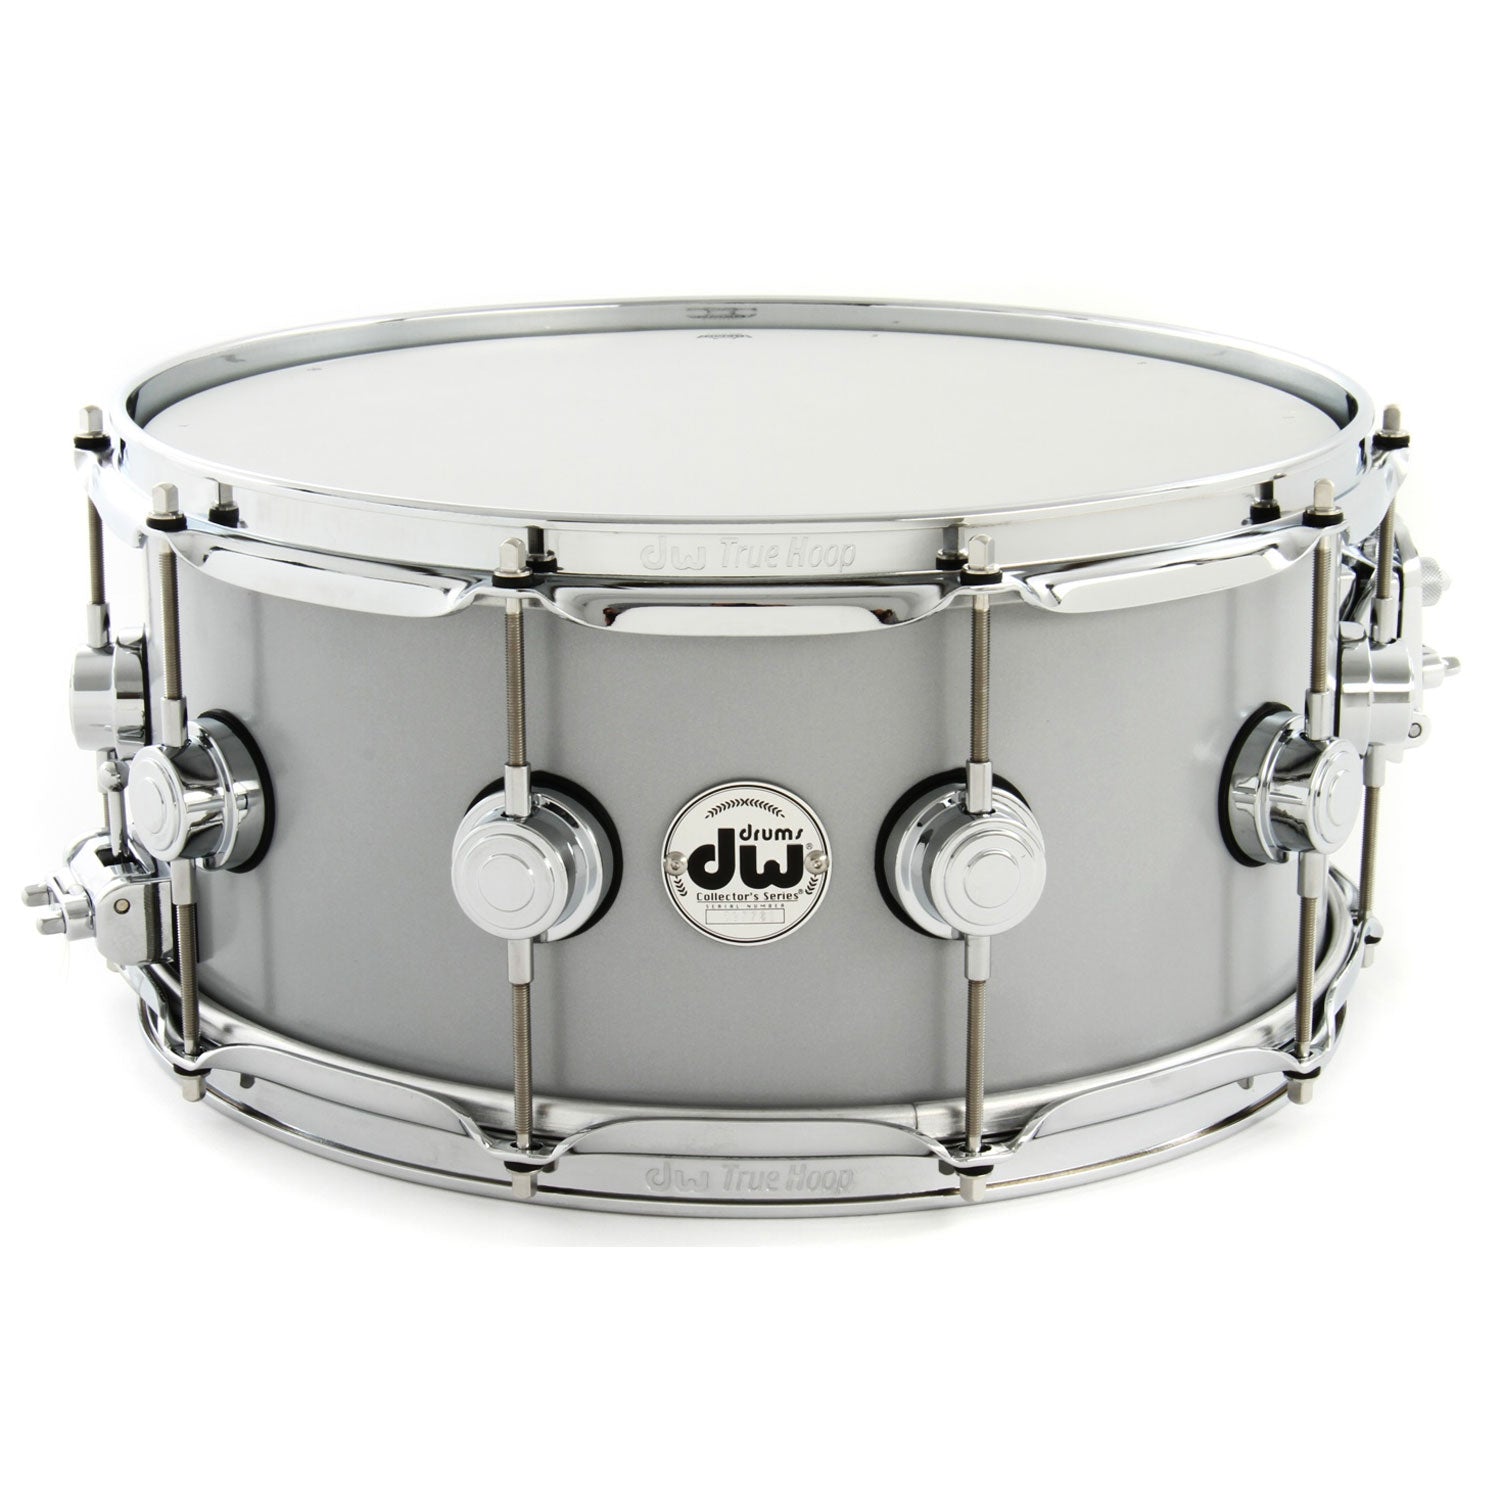 DW 6.5" x 14" Collector's Series Rolled Aluminum Snare